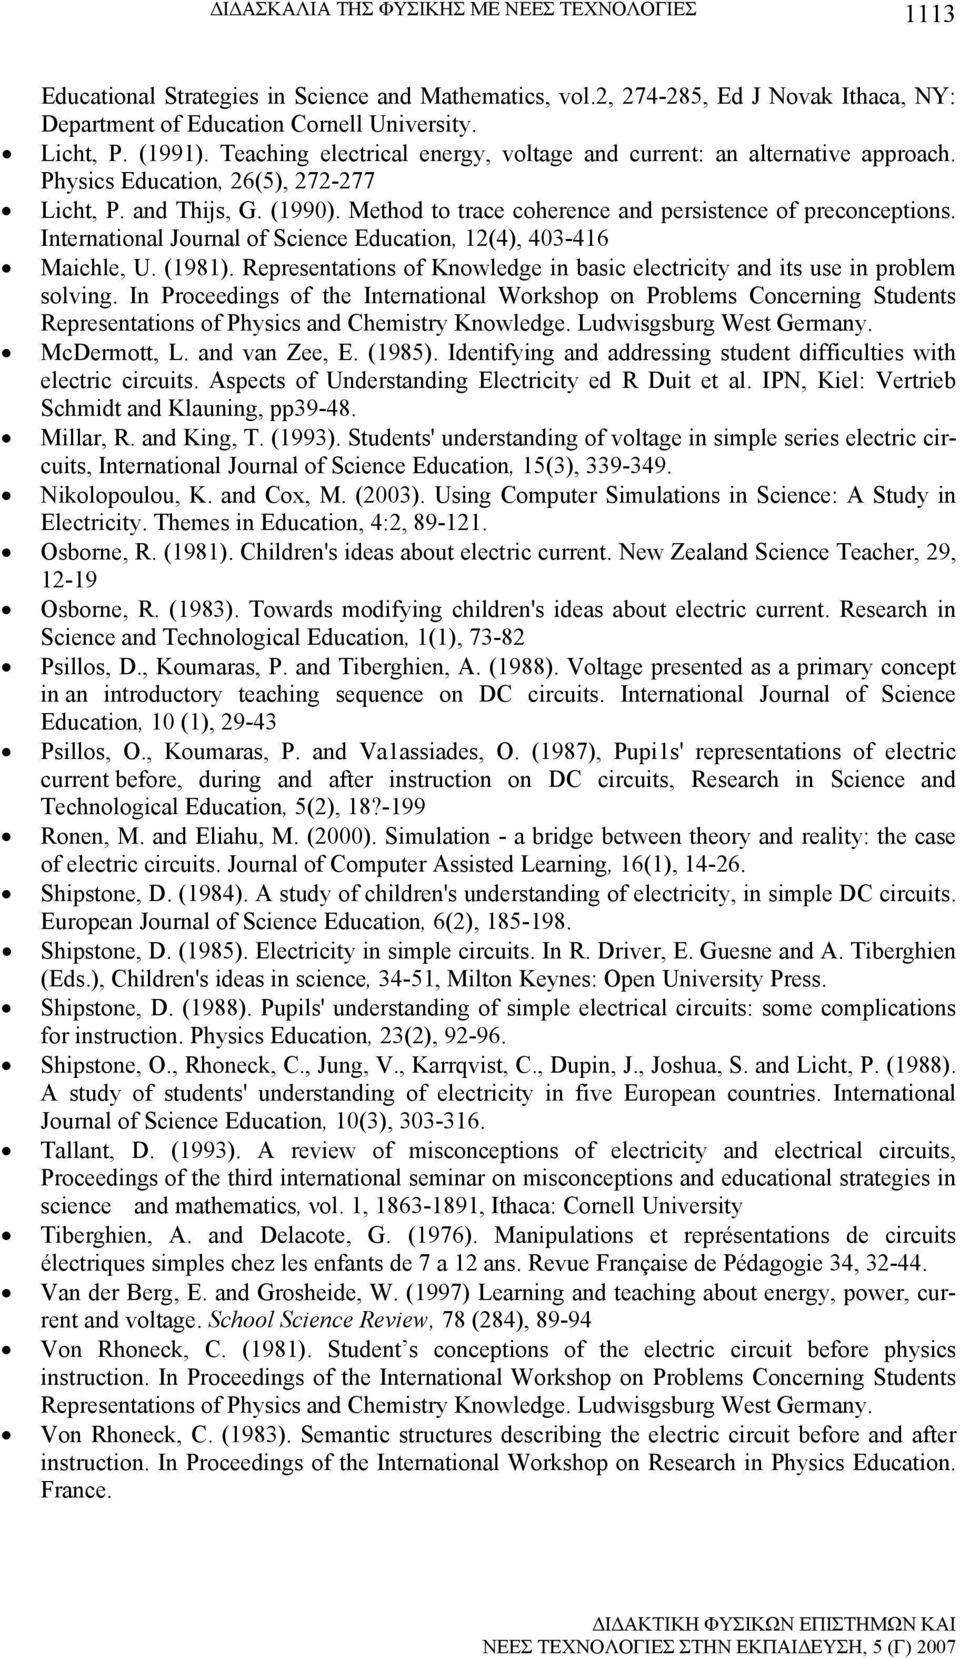 International Journal of Science Education, 12(4), 403-416 Maichle, U. (1981). Representations of Knowledge in basic electricity and its use in problem solving.